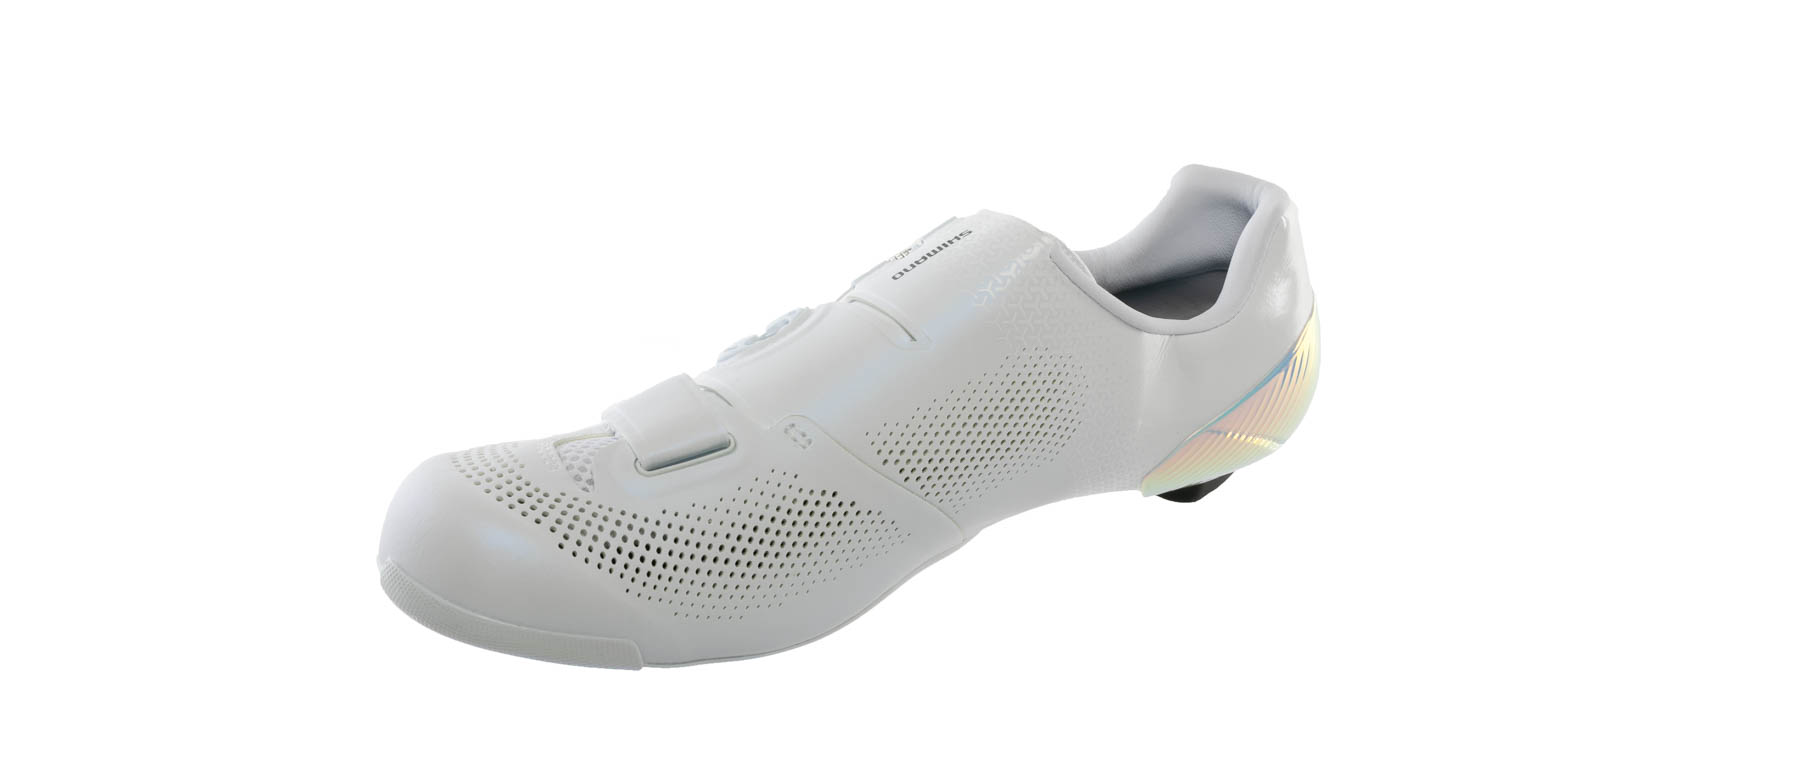 Shimano SH-RC903PWR S-Phyre Road Shoes